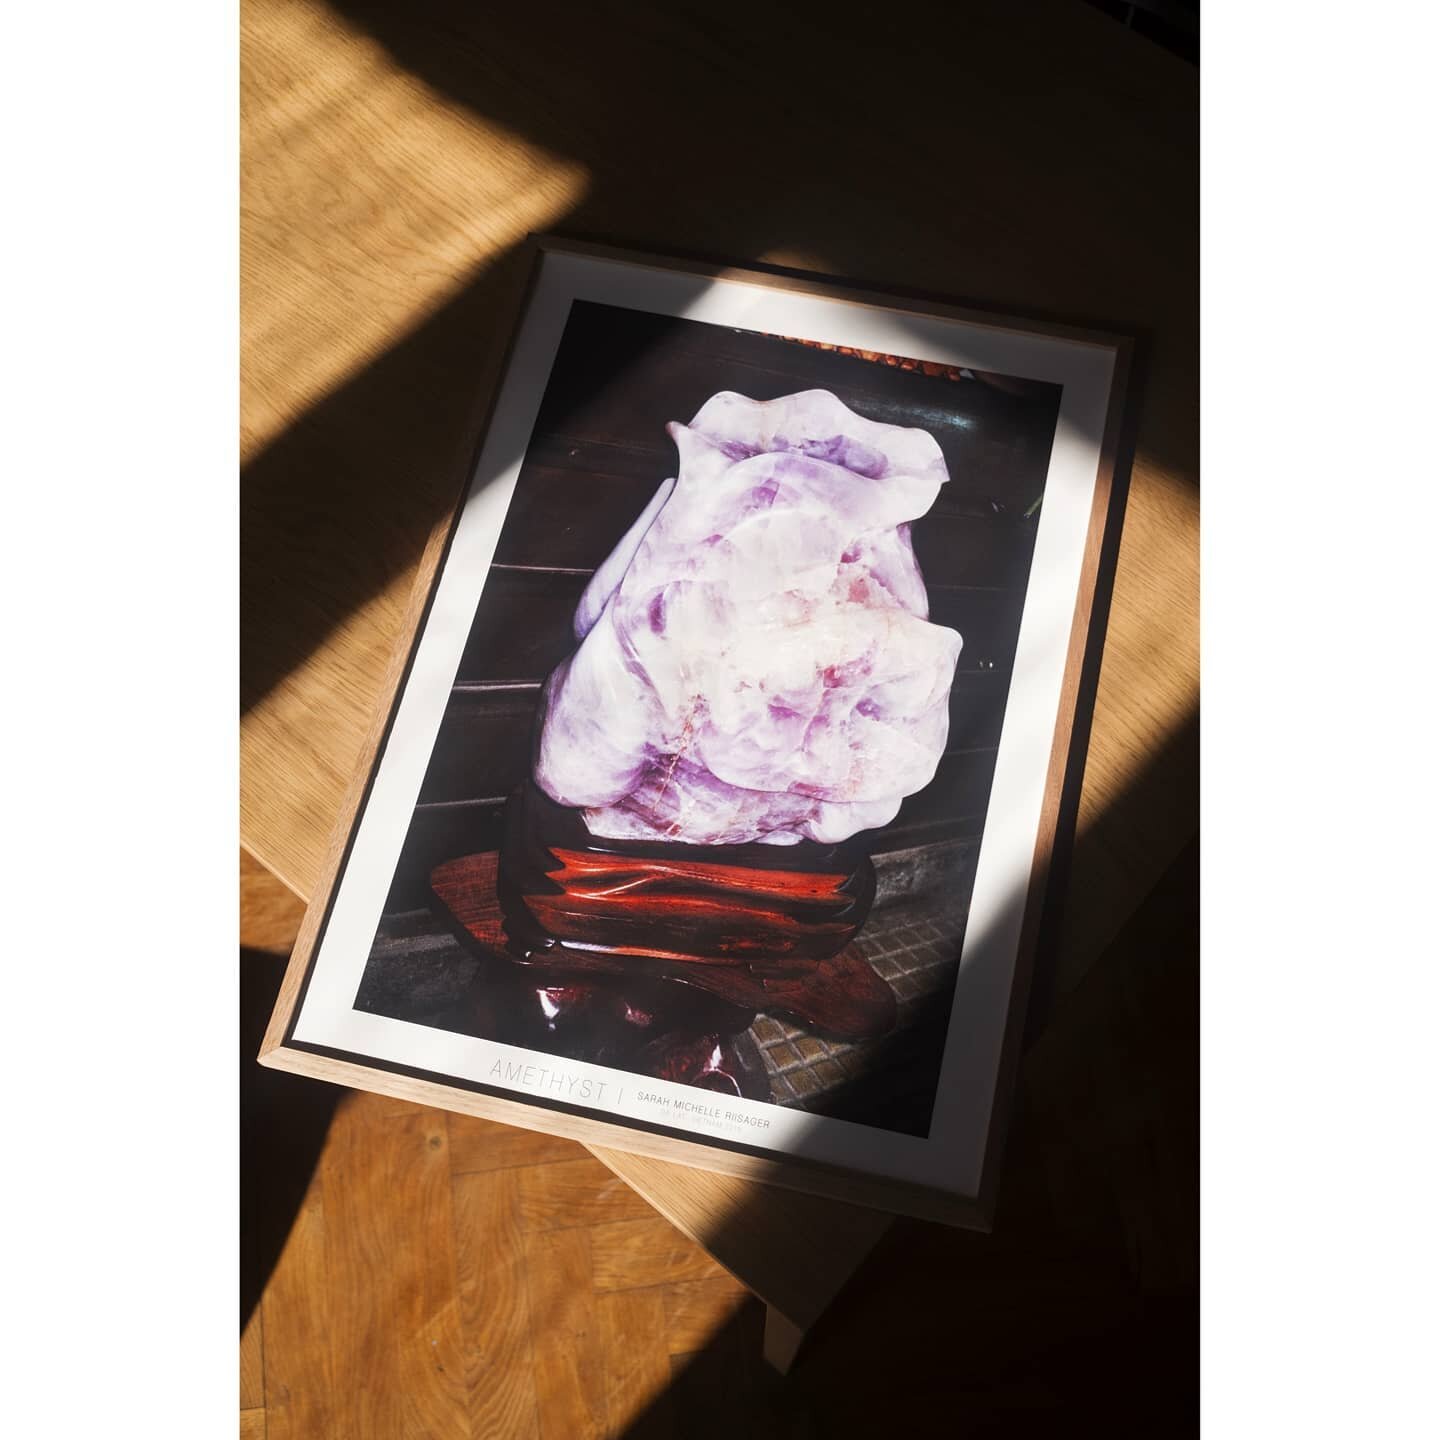 AMETHYST - A2 POSTER

&euro;54
42 cm x 59,4 cm
Inkjet print on 200 gsm high quality fine art paper. 
Please order by PM or follow link in bio. 
All posters are signed by me. 
.
.
.
.
#denmark #copenhagen #poster #postershop #fineart #color #35mm #fil